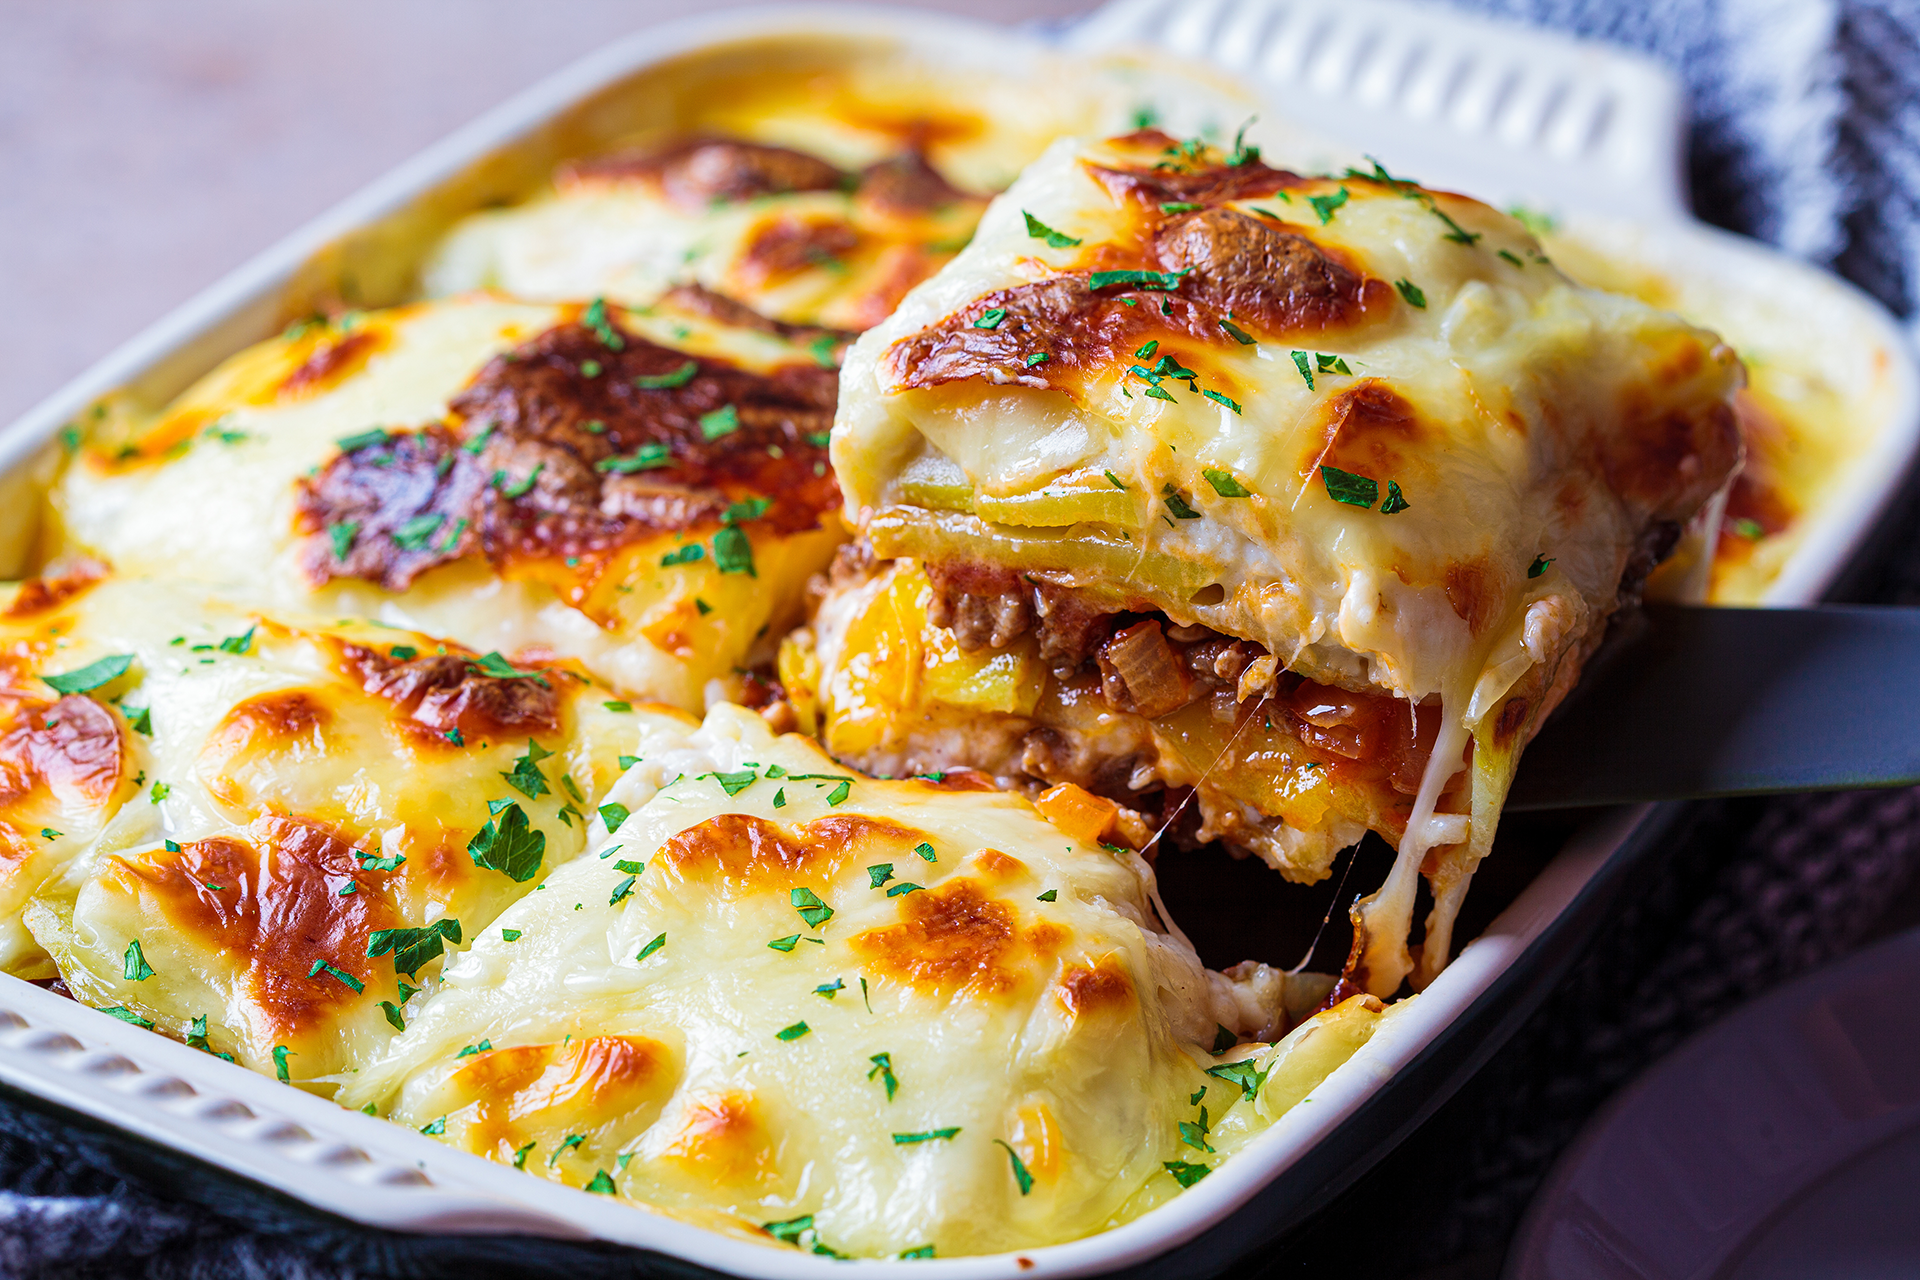 Layers of eggplant, meat, and potatoes baked to golden perfection